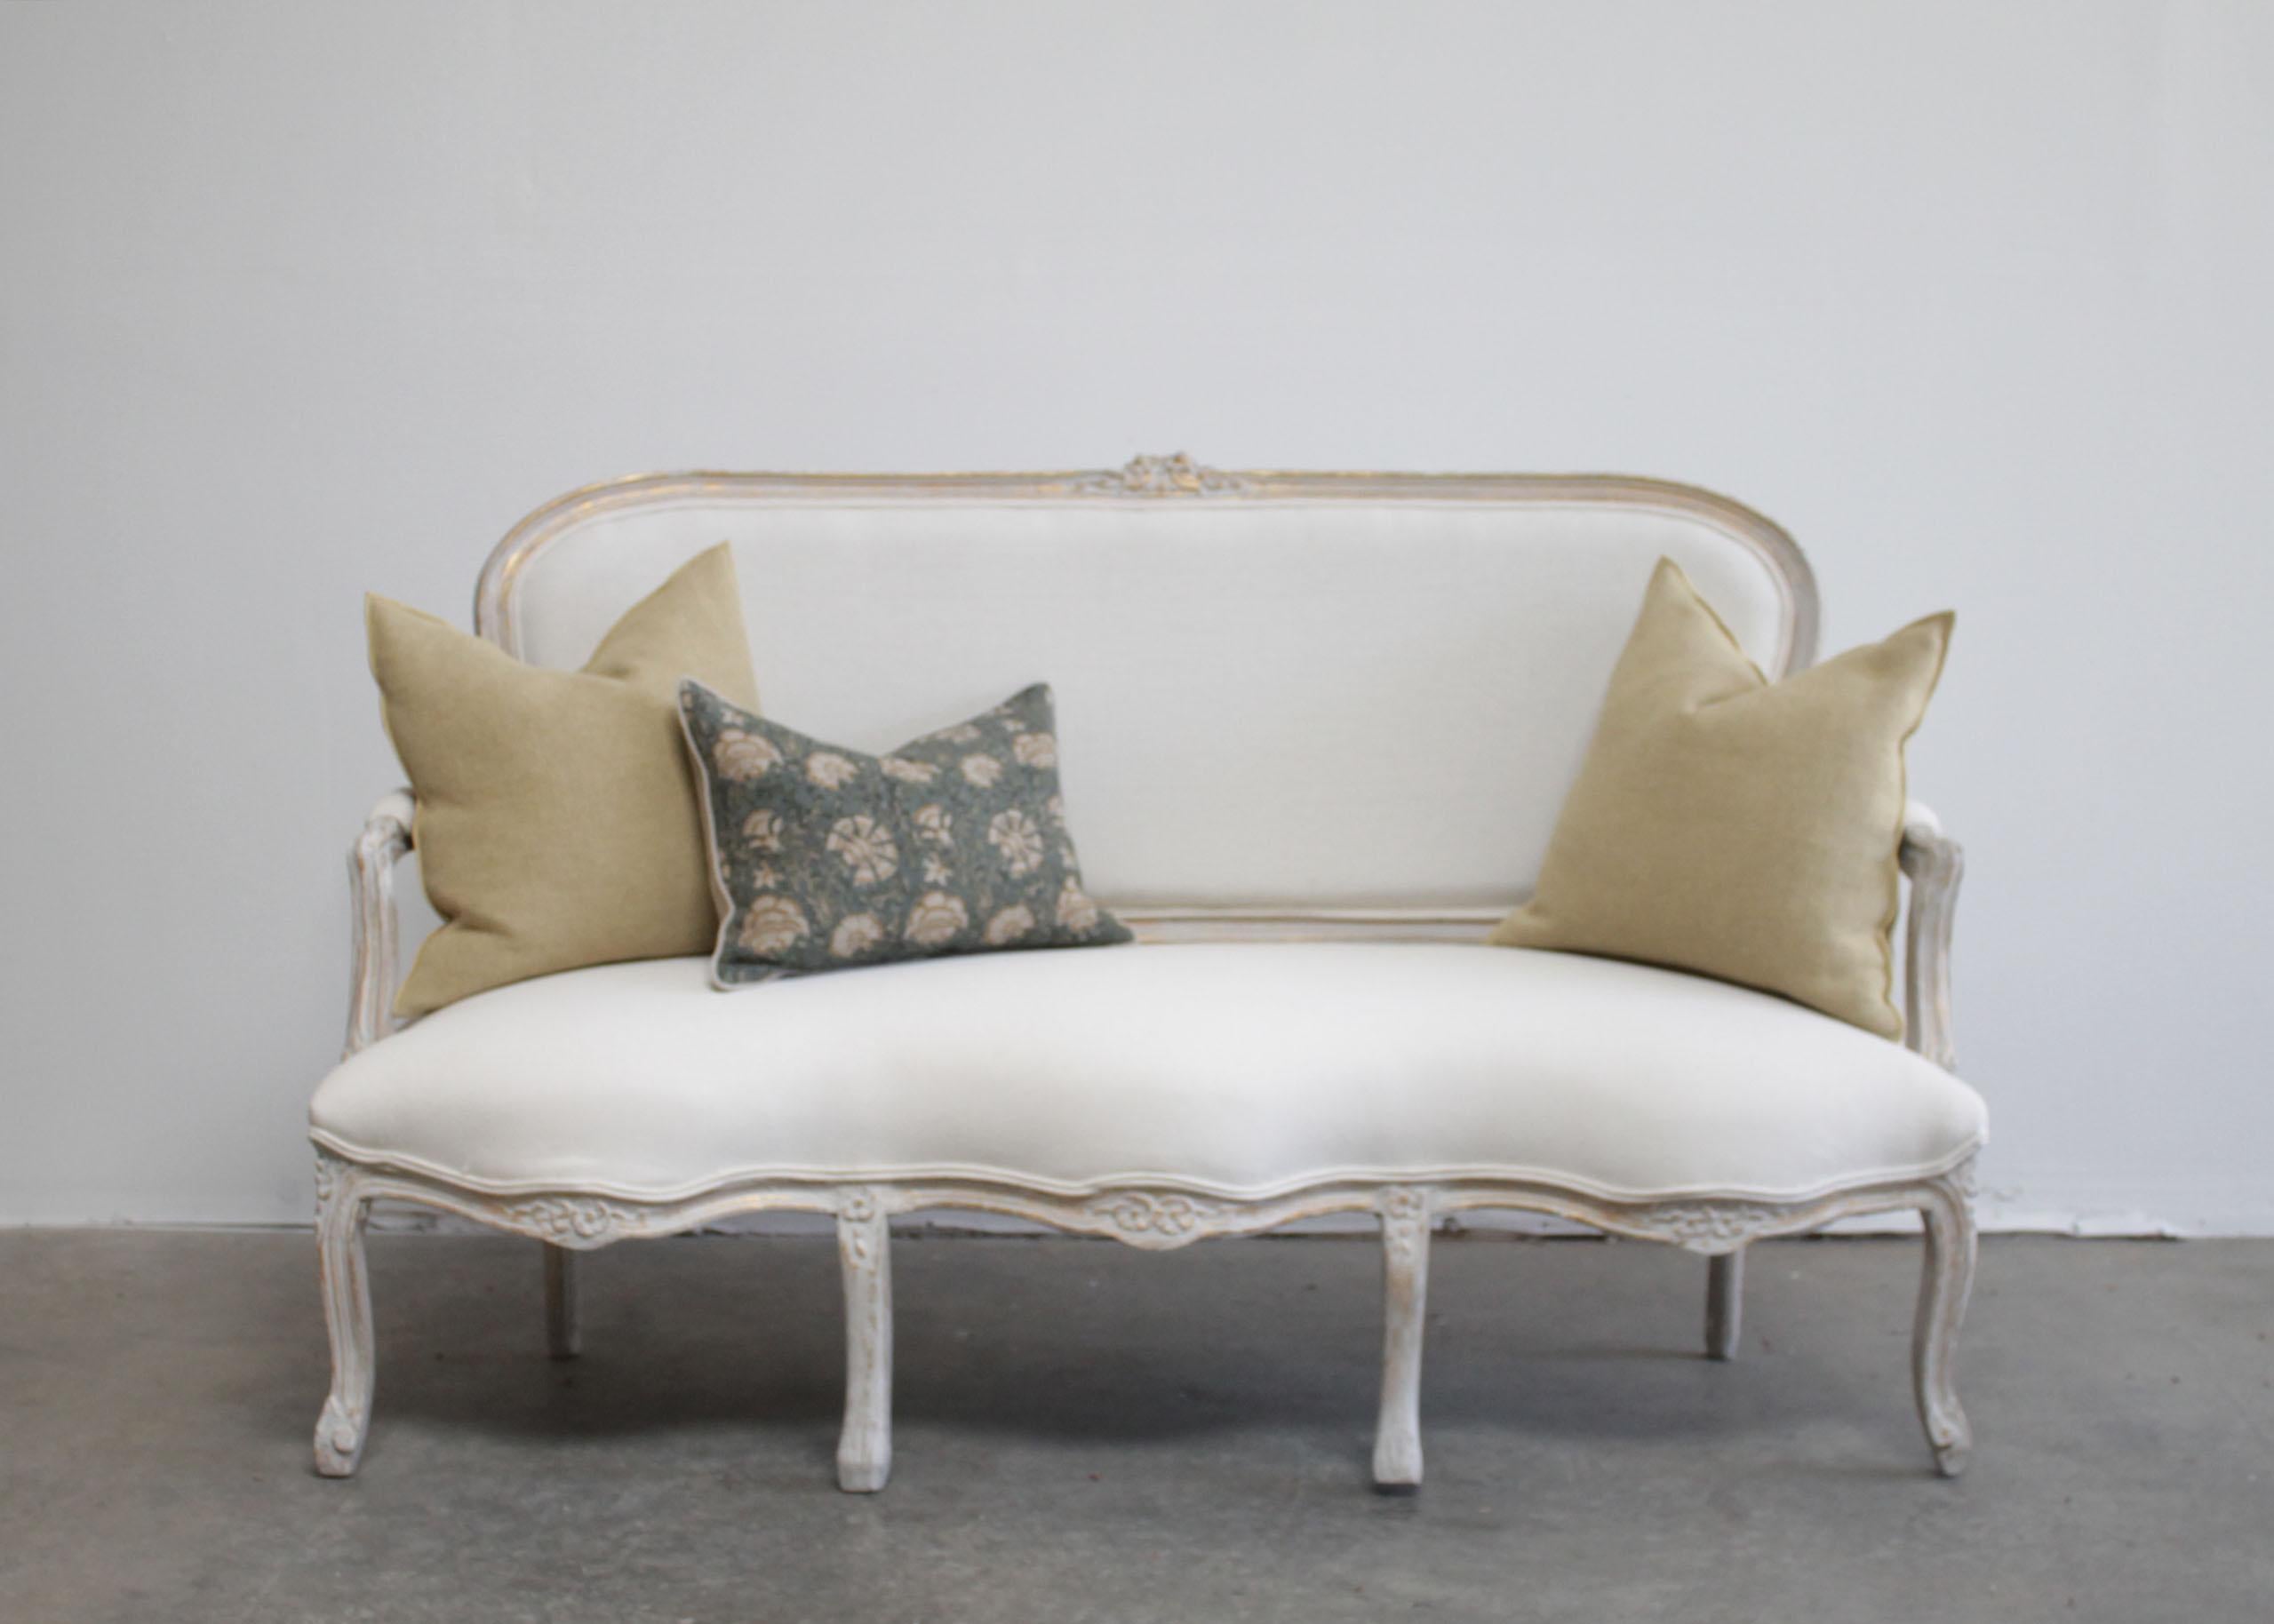 Vintage painted and upholstered Louis XV style open arm sofa settee.
Painted in a French gray with subtle distressed edges, where gilt and wood show through.
Classic cabriole carved legs, with a floral carvings, and large double flower carving at